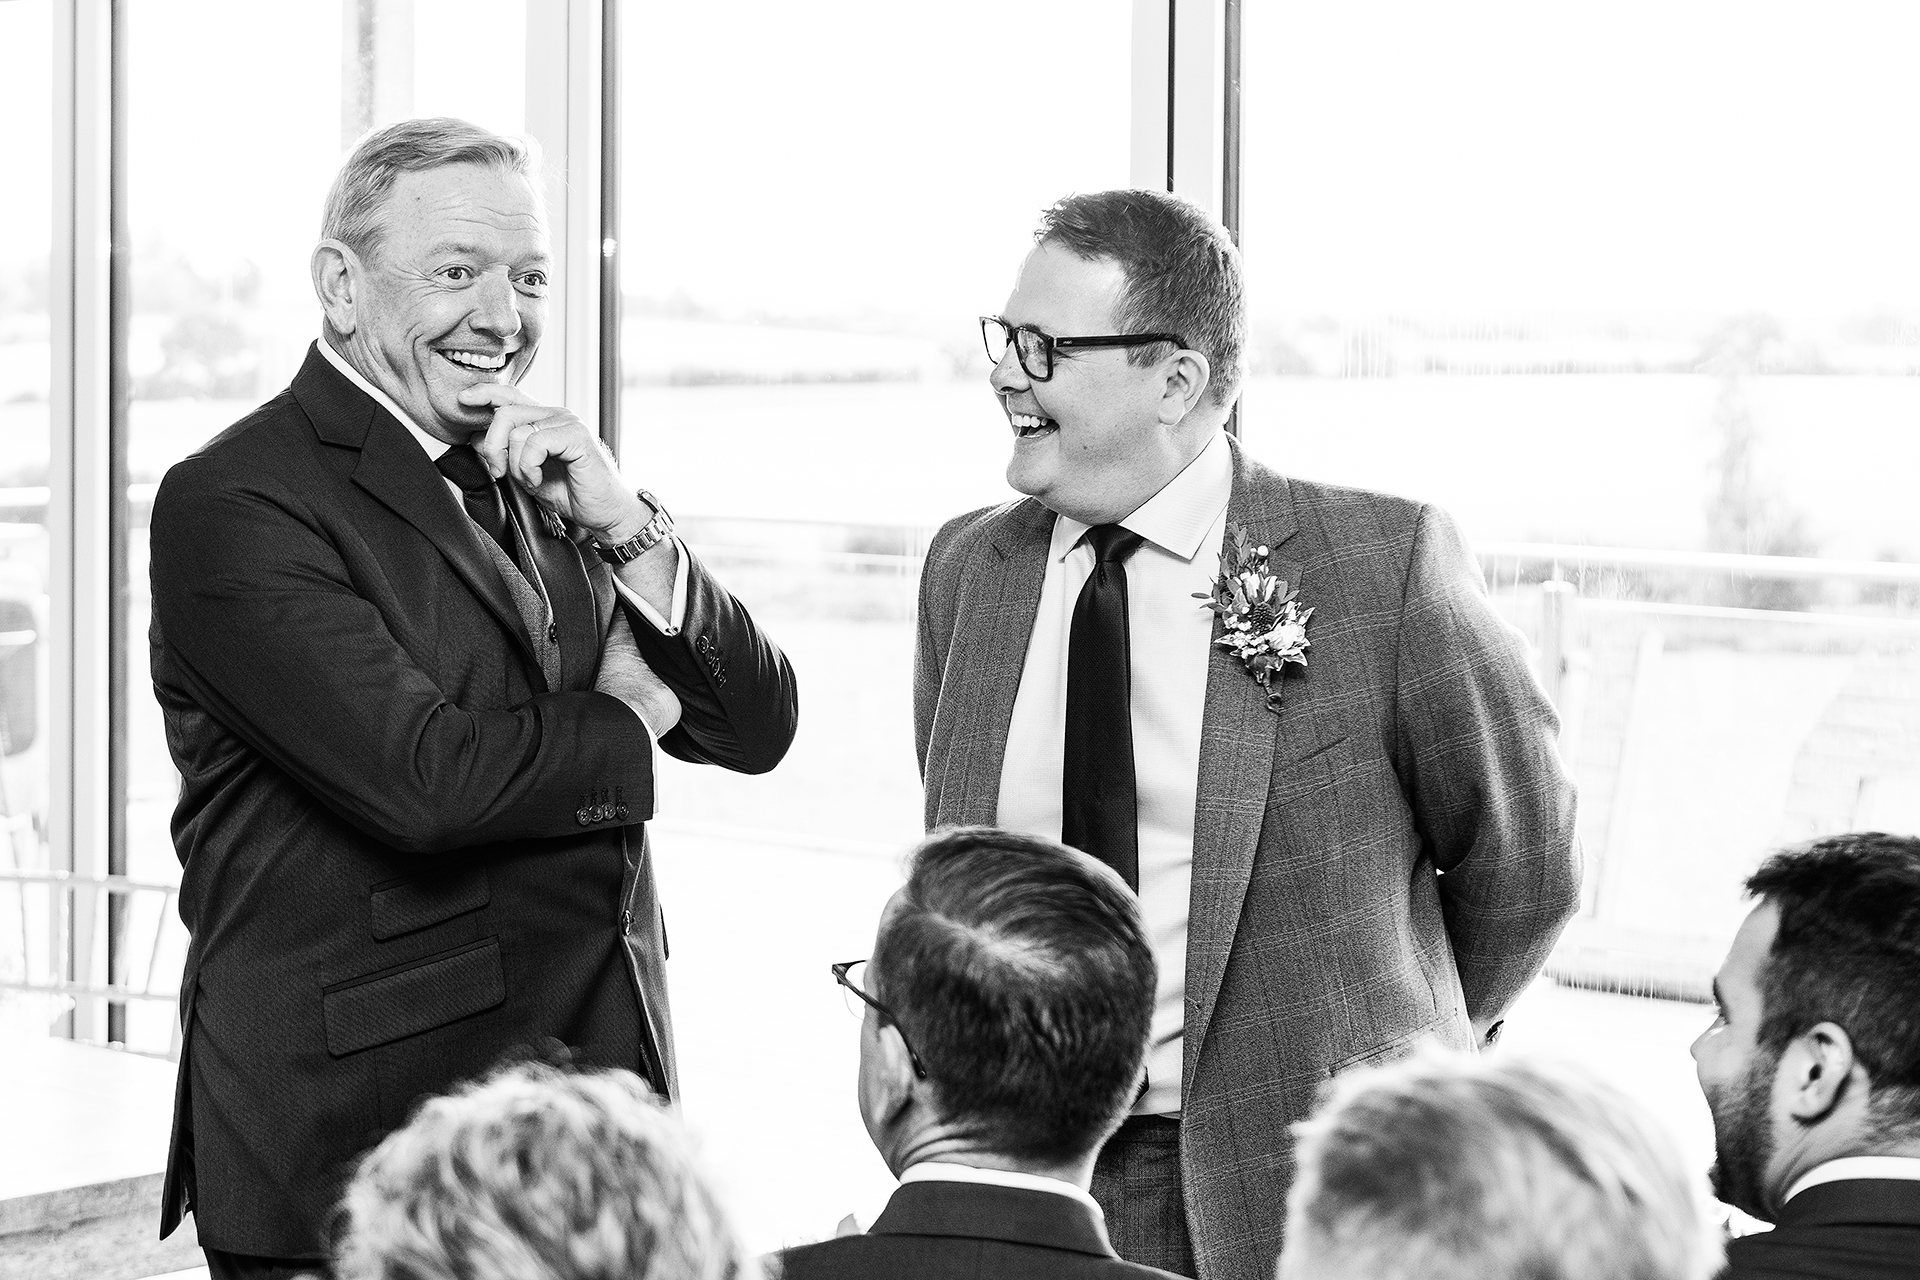 photography of the groom and best man before the wedding ceremony